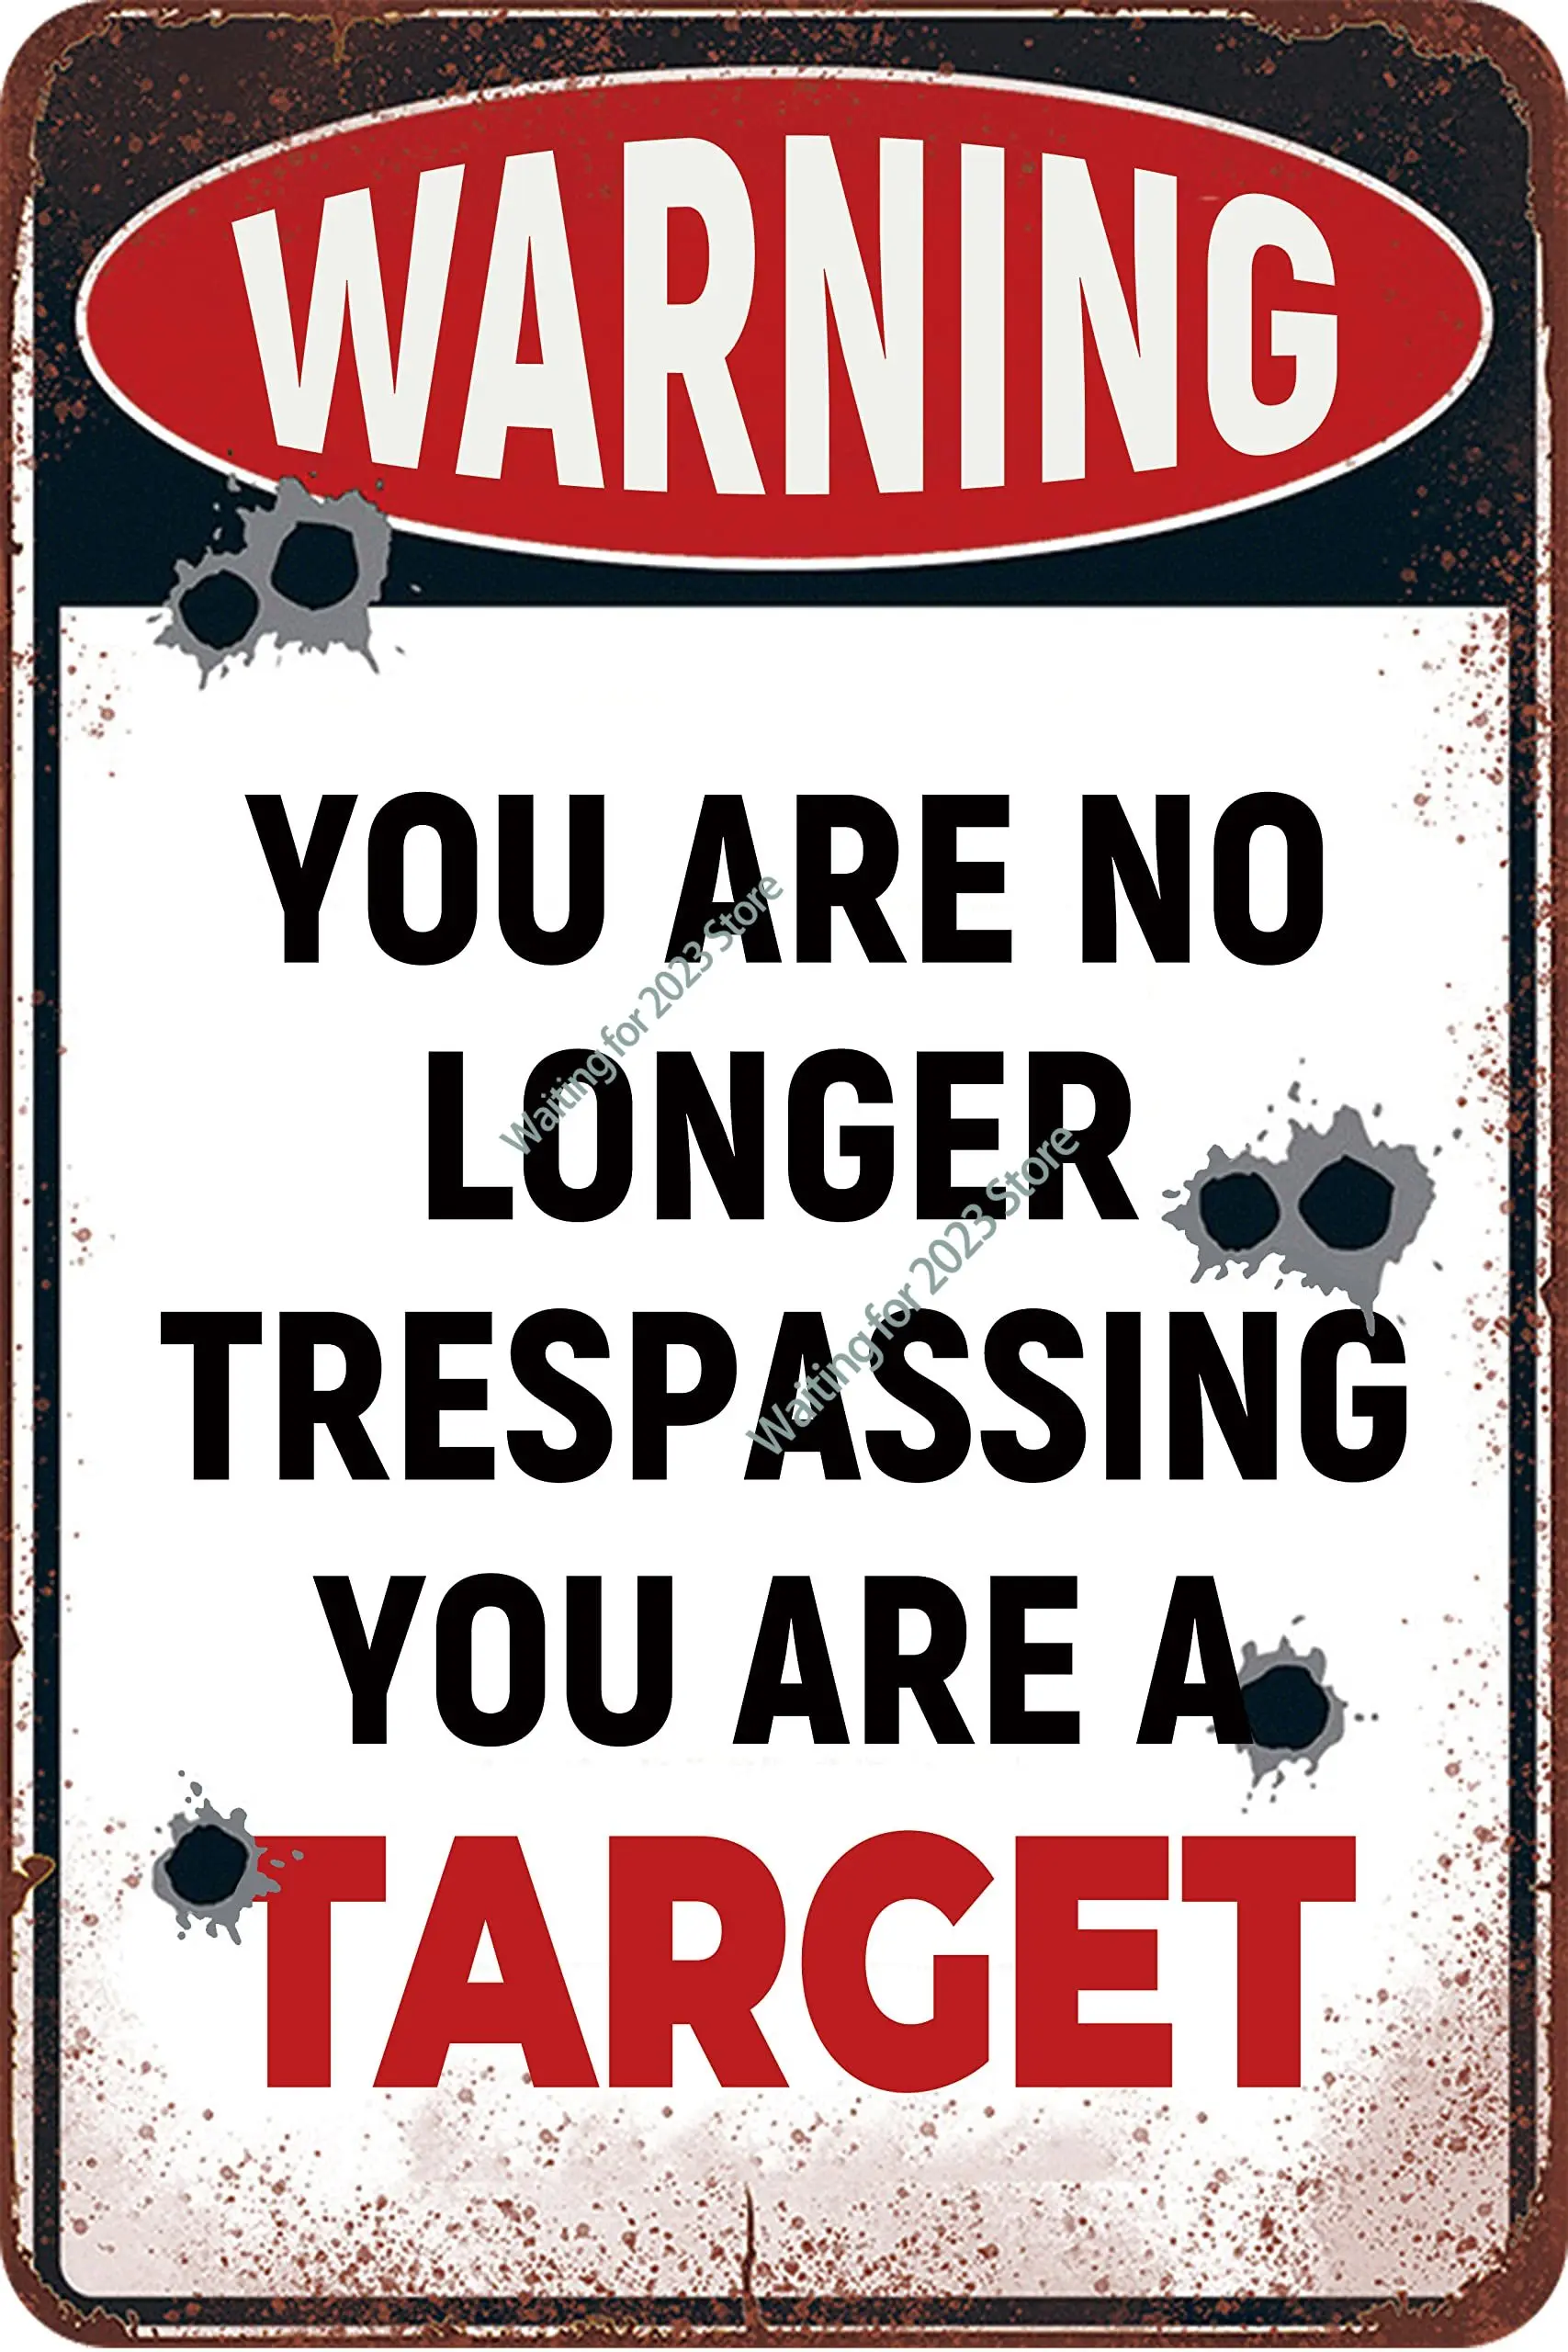 

Warning - You are no Longer Trespassing,You are a Target.Funny Metal Tin Sign for Your Garage, Man cave, Yard or Wall Decor